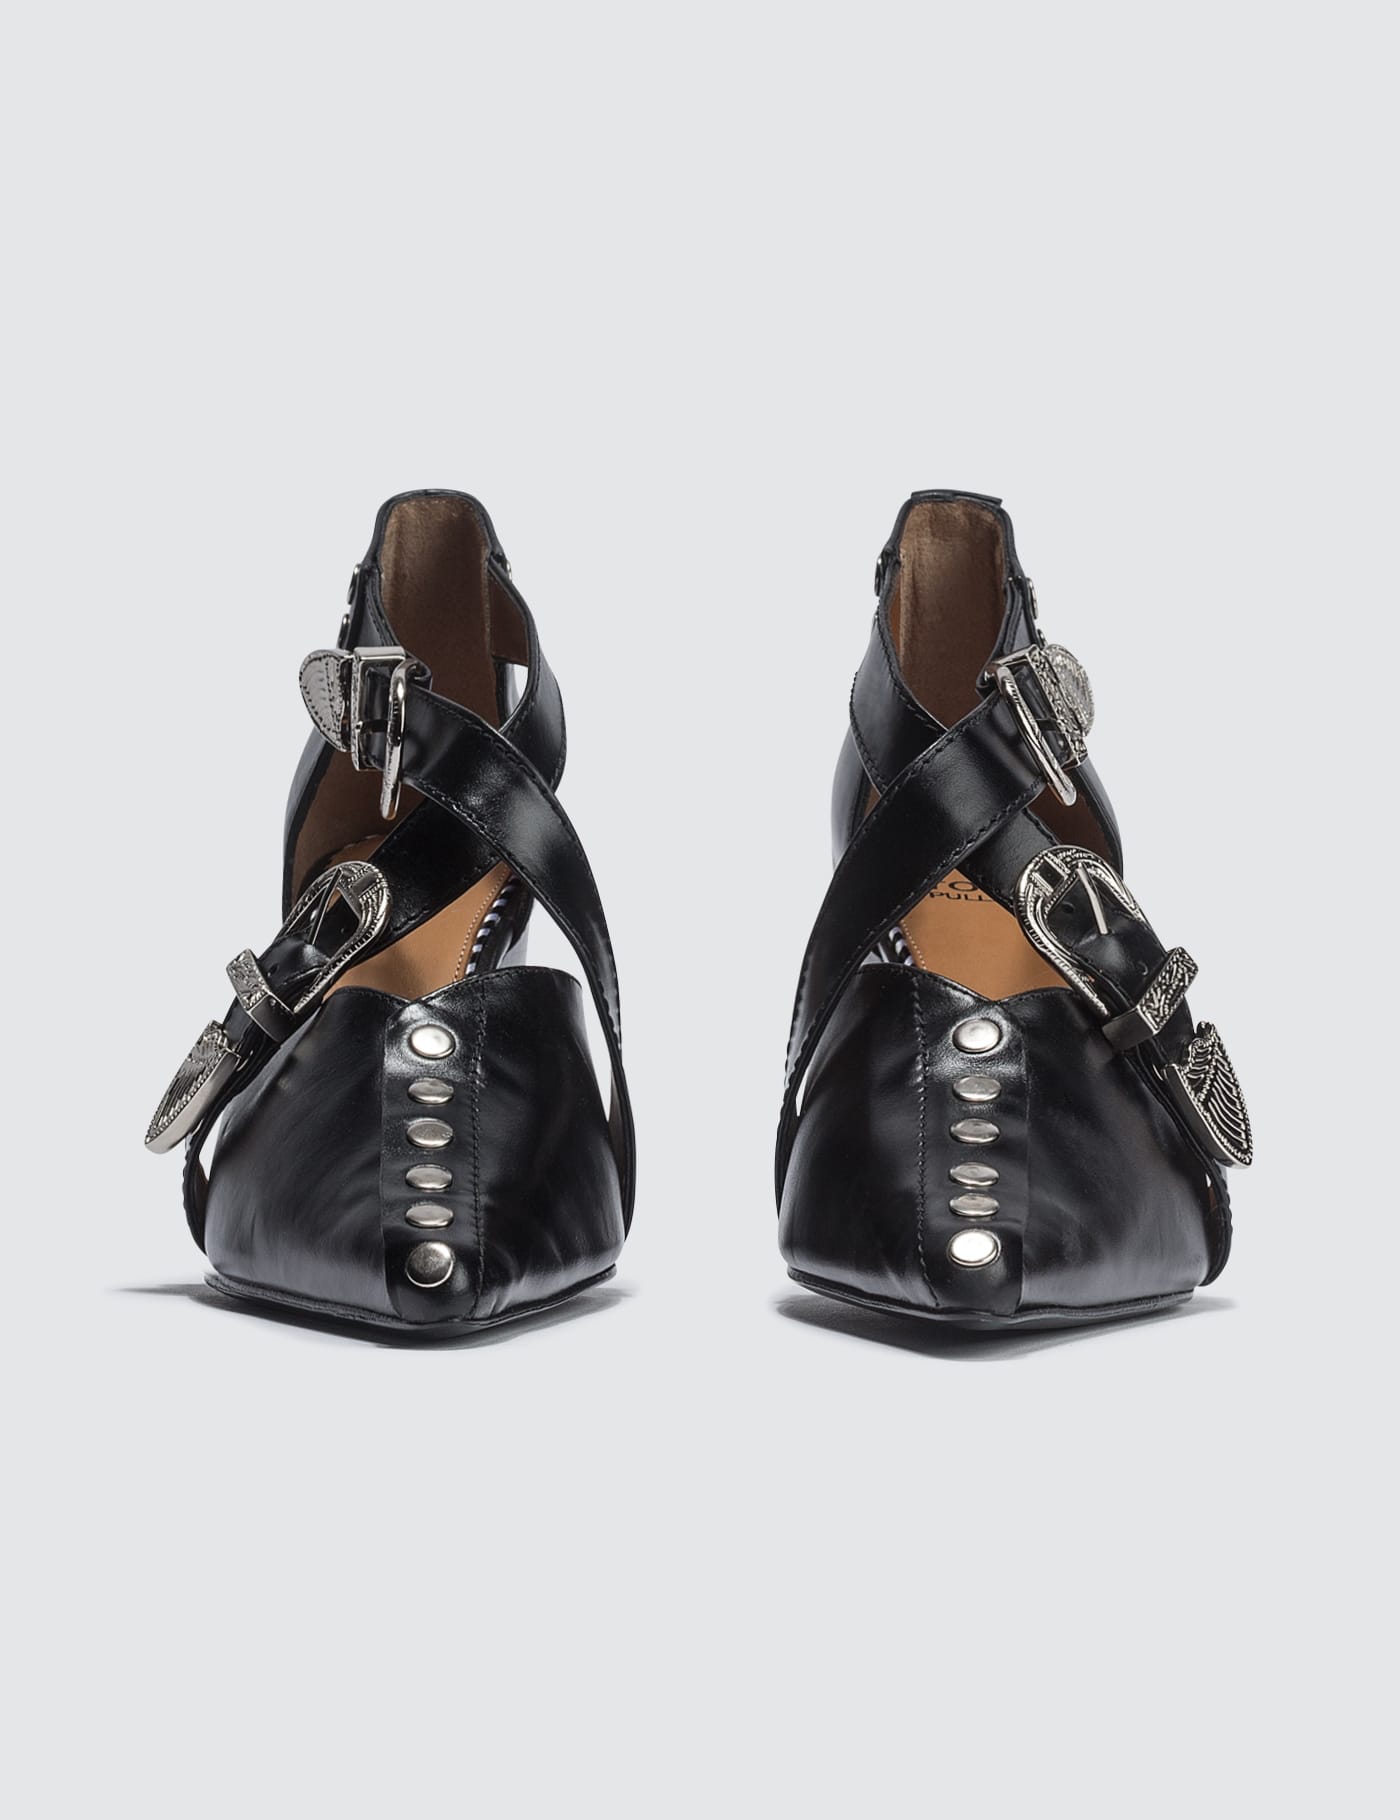 Toga Pulla - Strap Mid Heel Sandals | HBX - Globally Curated 